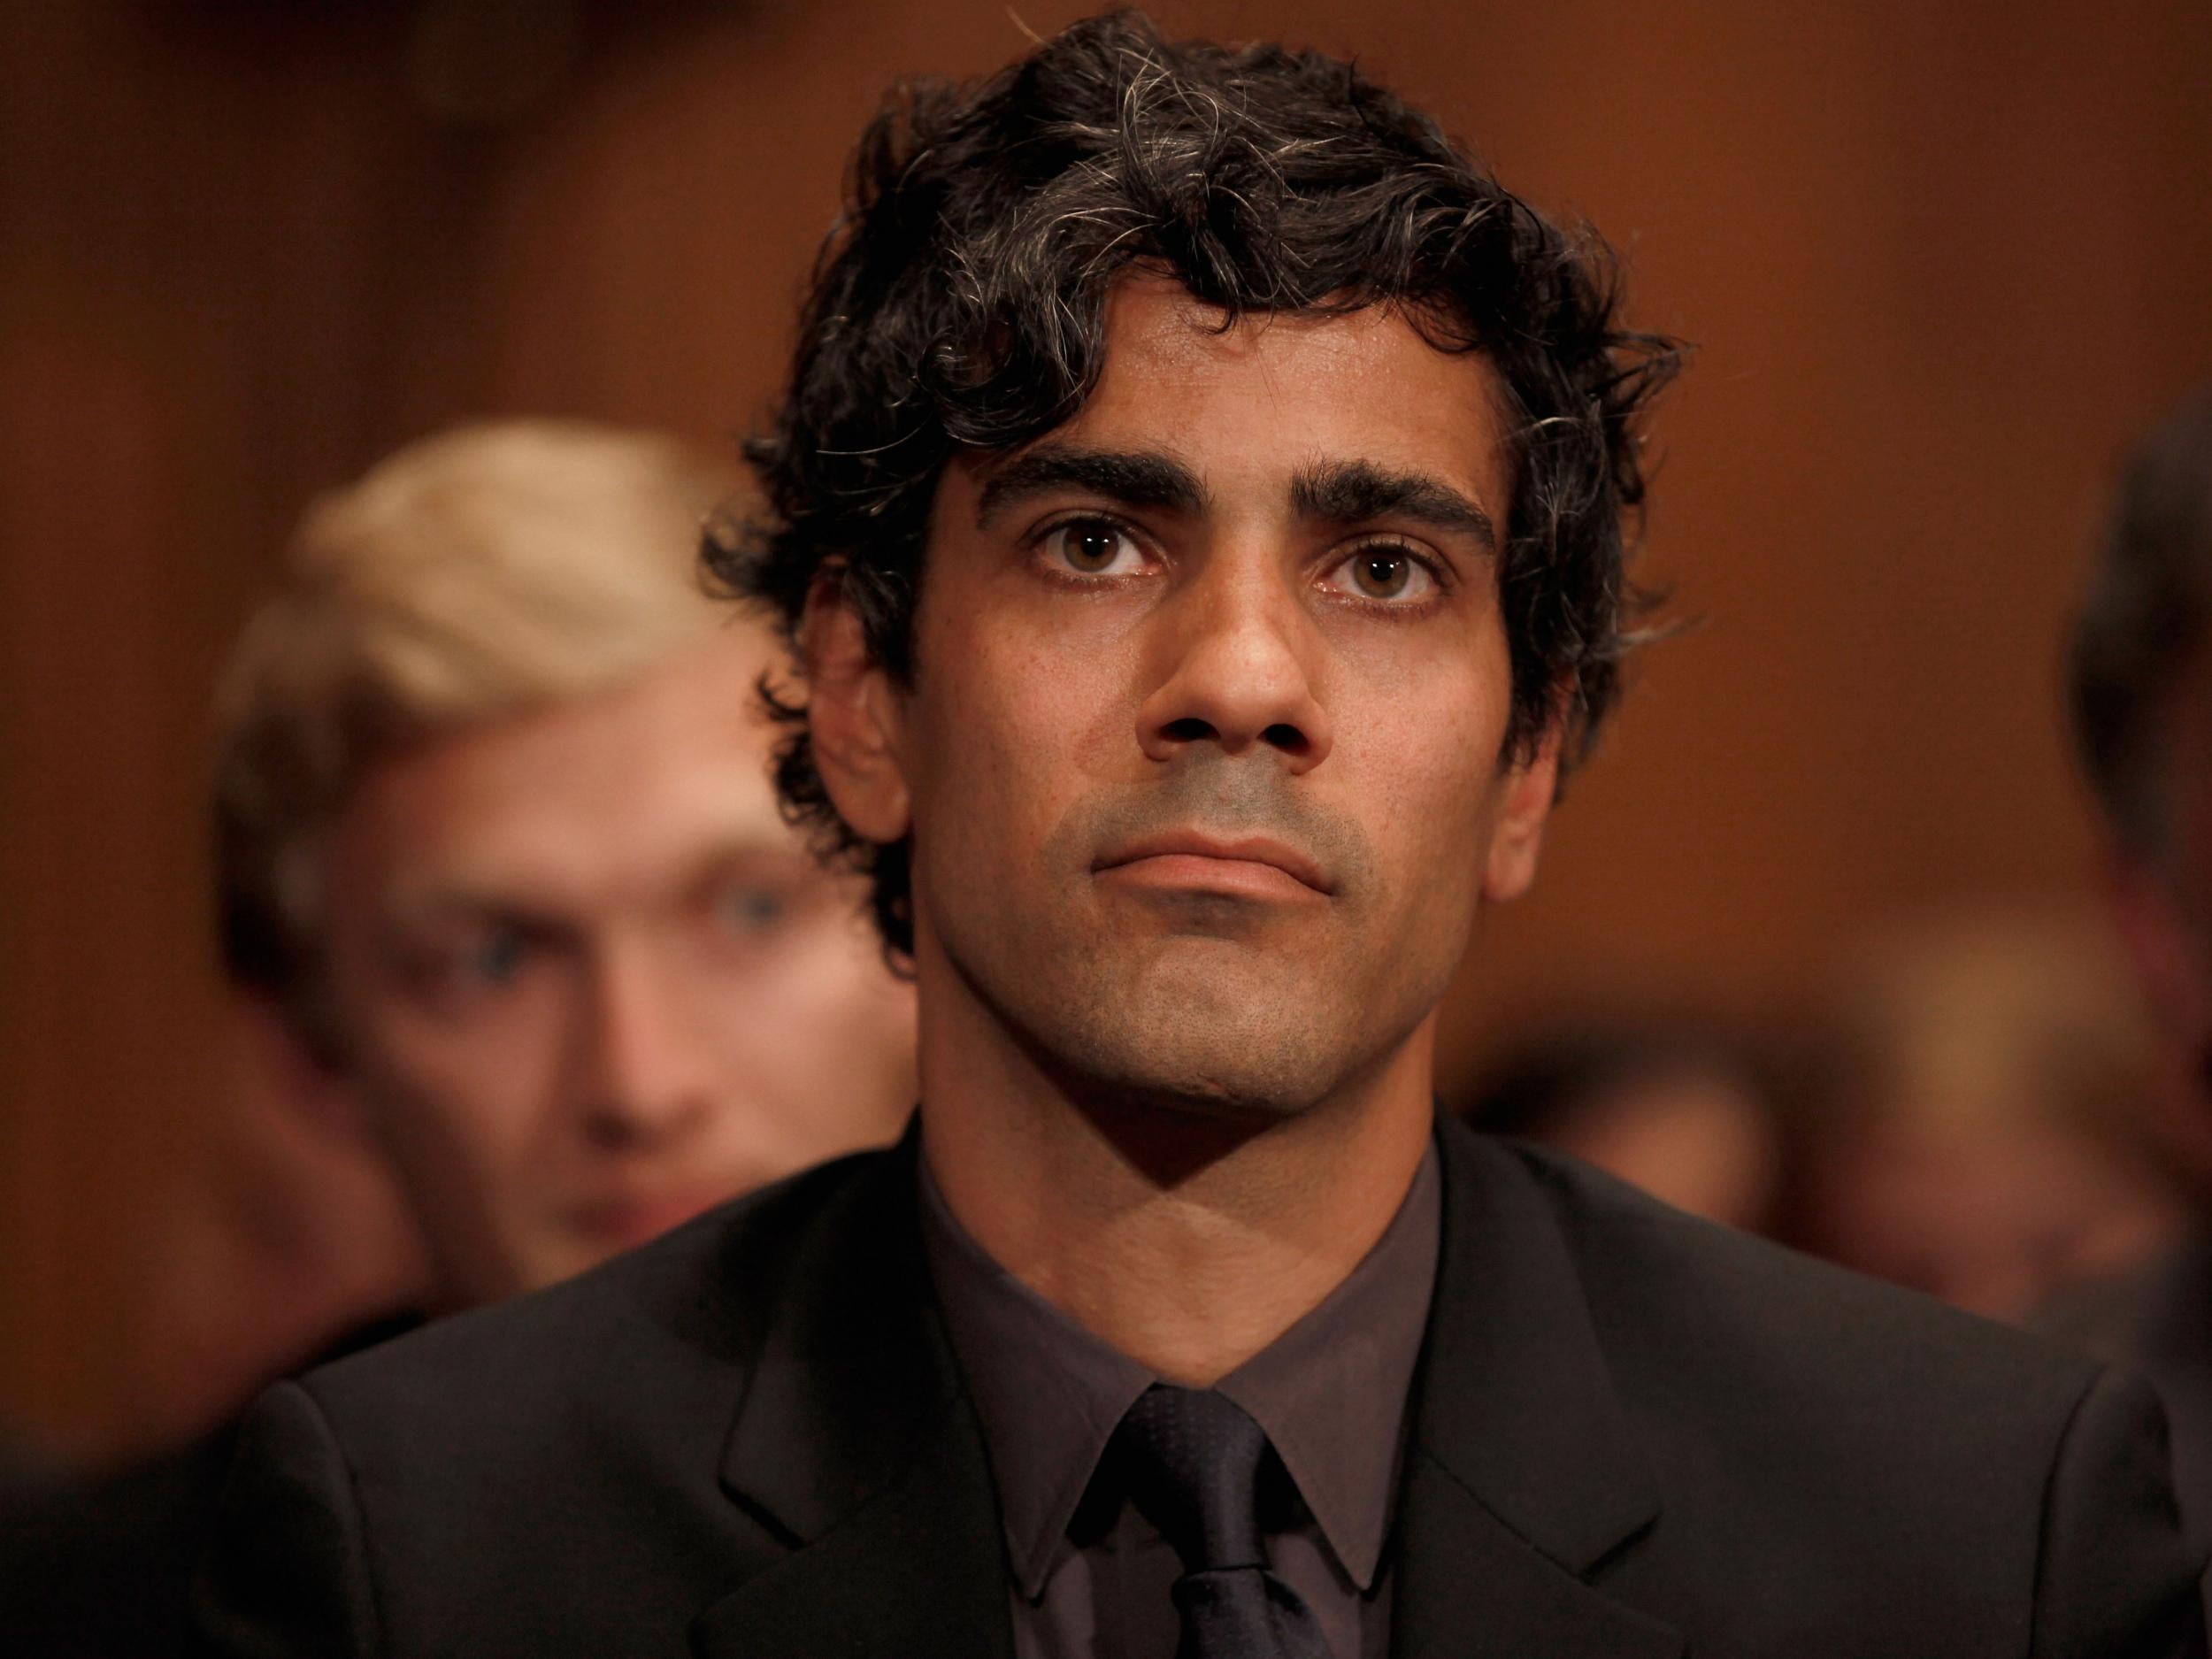 Yelp CEO Jeremy Stoppelman listens to Google Executive Chairman Eric Schmidt during a US Senate Judiciary hearing on alleged anti-competitive practices by Google in 2011